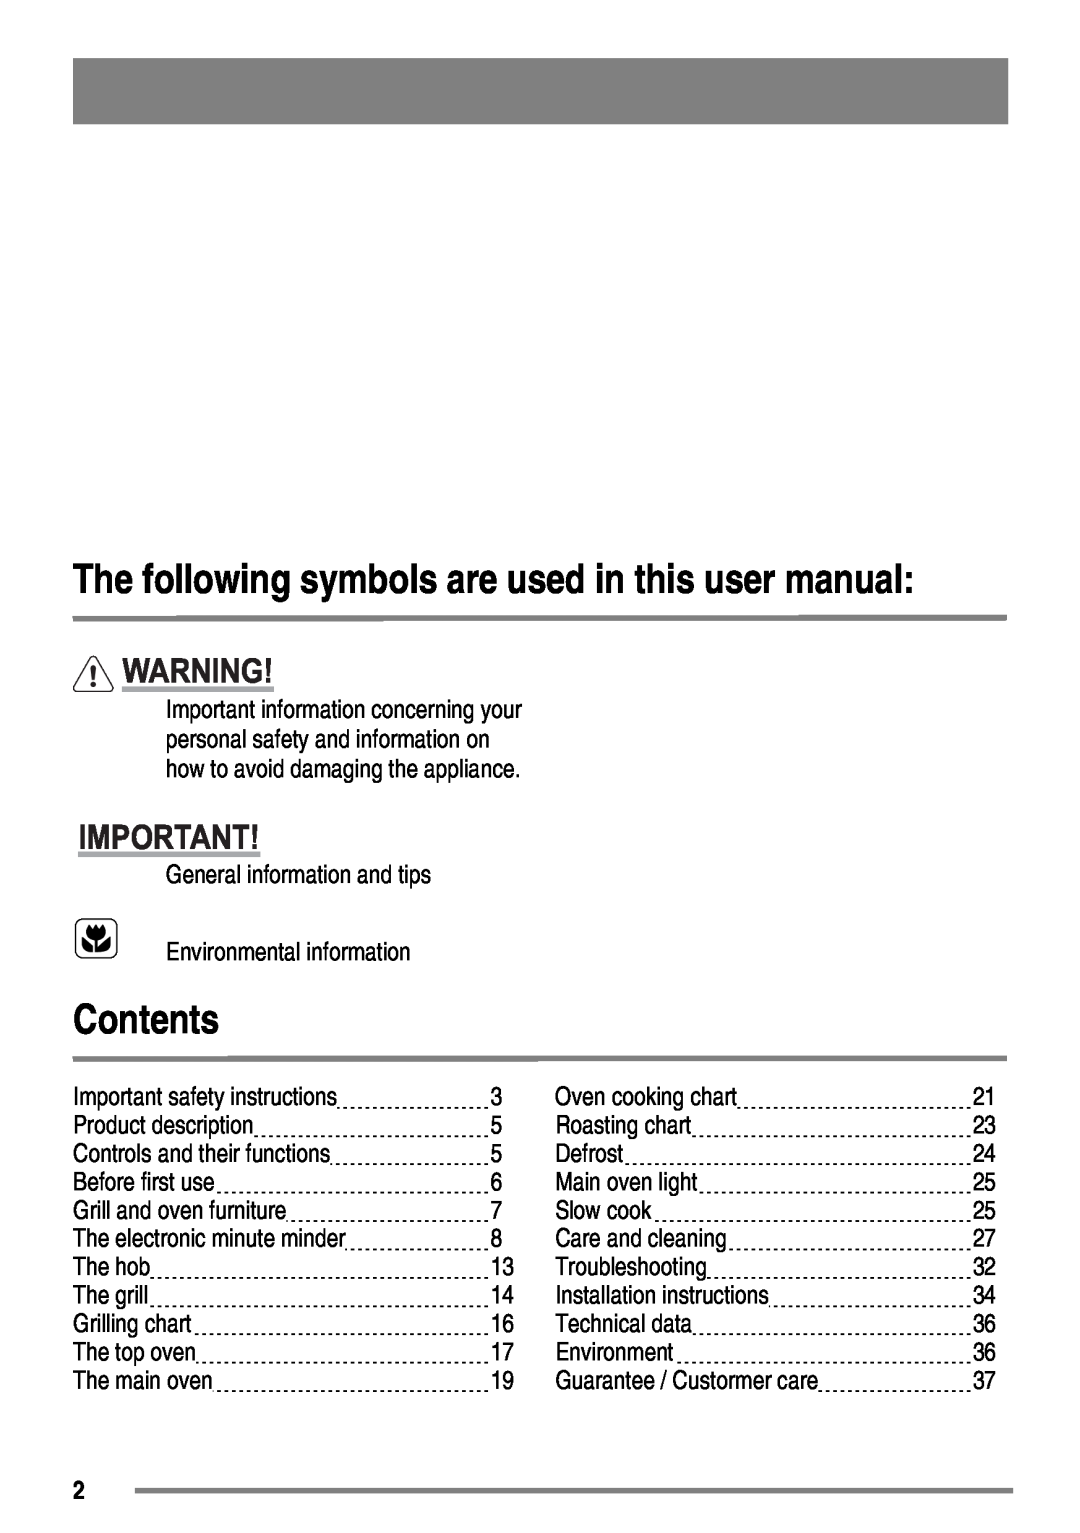 Zanussi ZKC5540 Contents, The following symbols are used in this user manual 